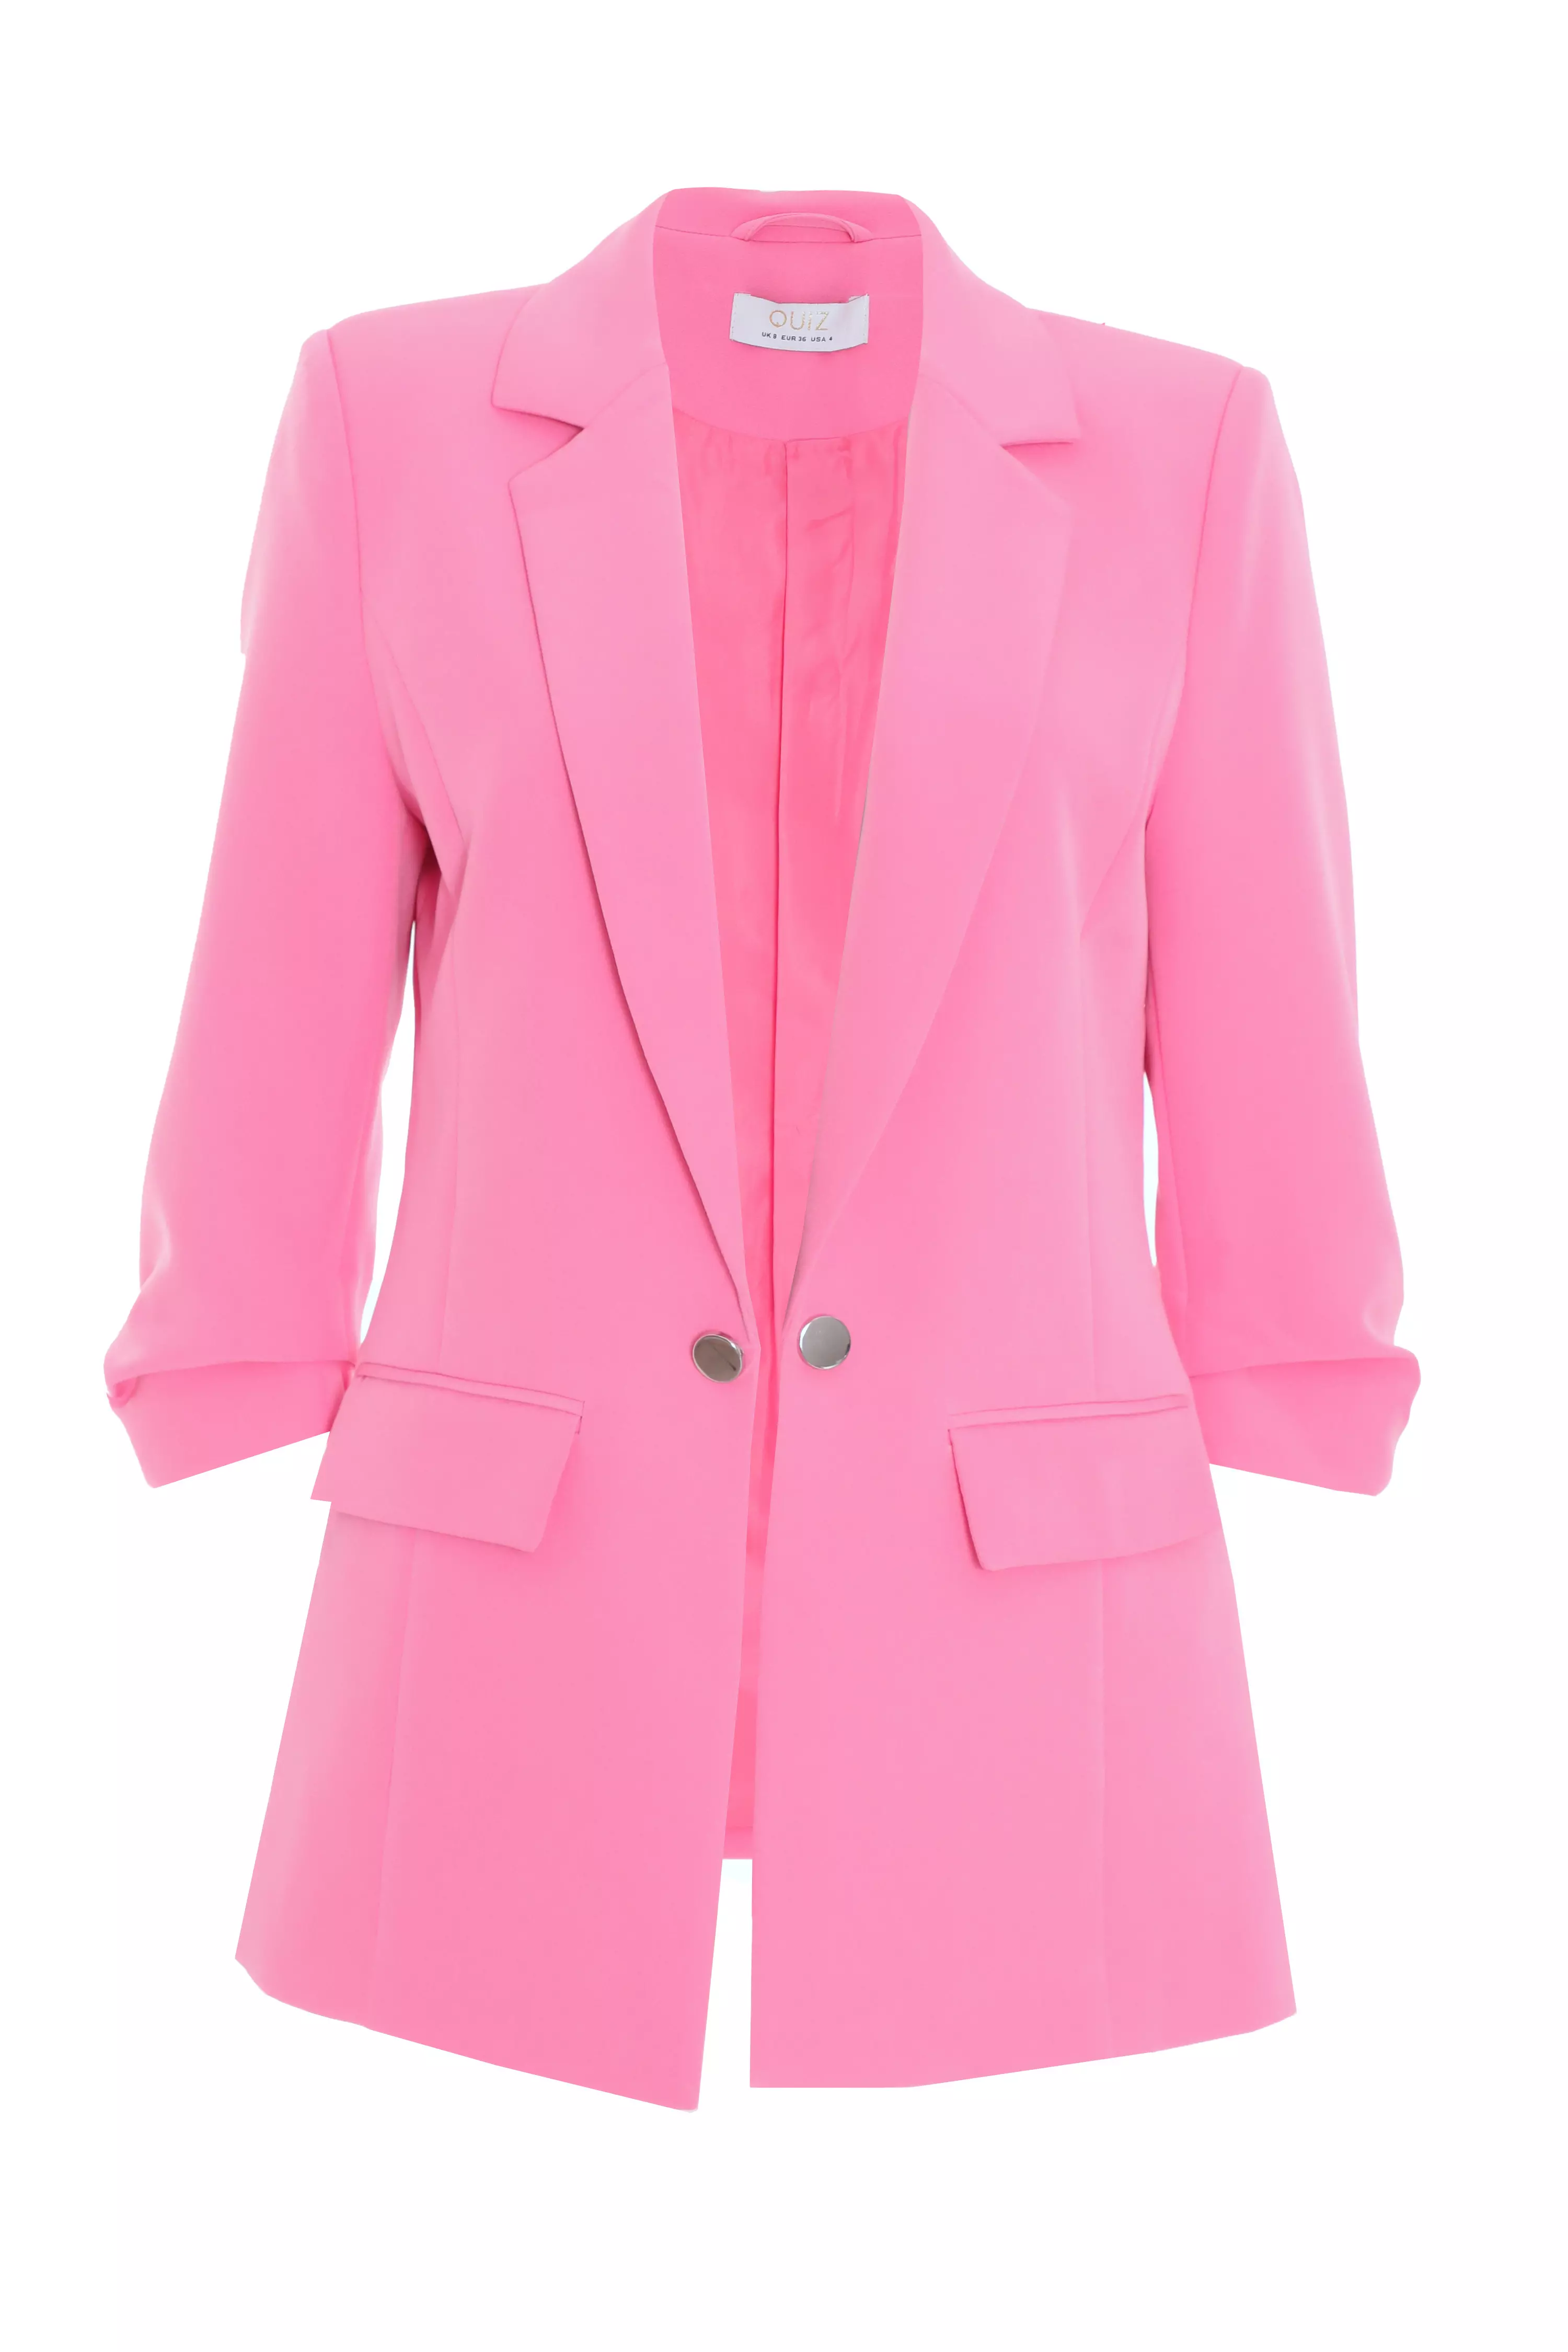 Petite Pink Ruched Tailored Blazer - QUIZ Clothing